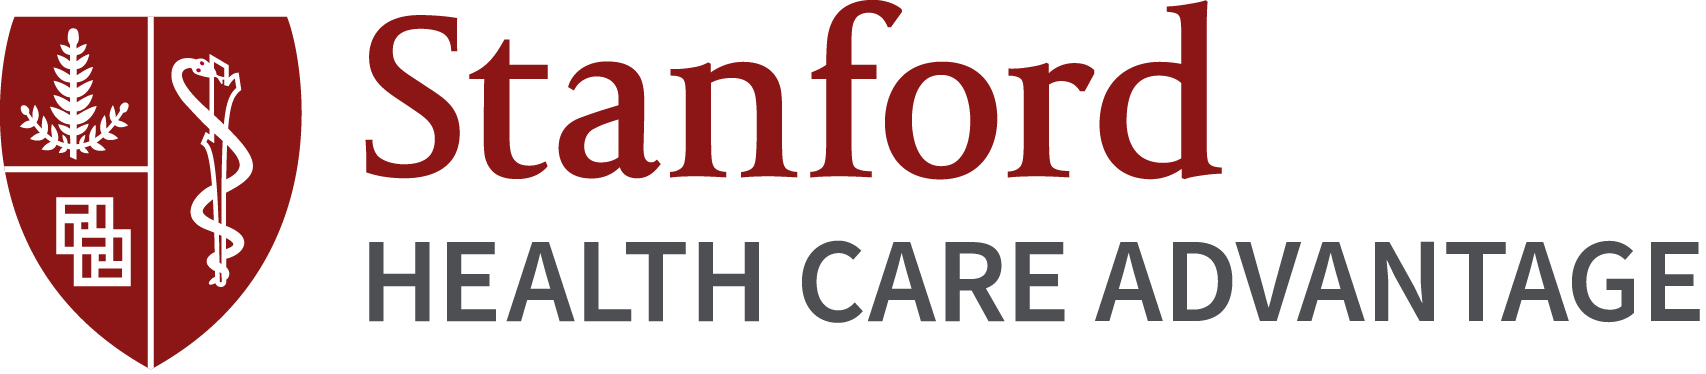 Stanford Health Care Advantage and Alliance